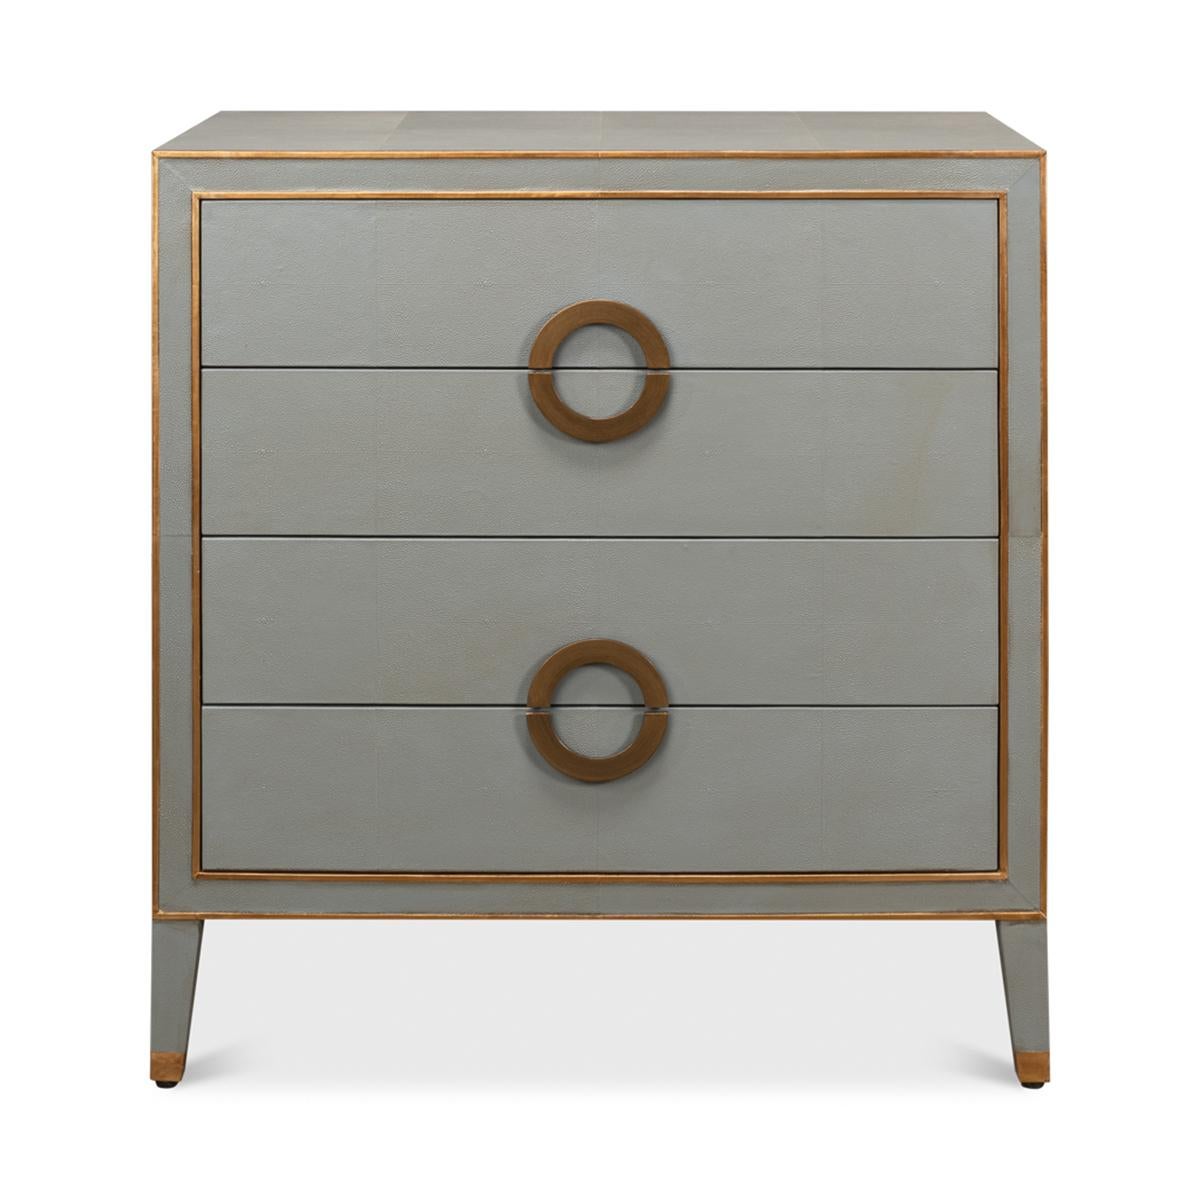 Art Deco style Shagreen chest of drawers. Grey shagreen embossed leather with gold ring handles and trim, with four drawers raised on square tapered legs.

Dimensions: 38